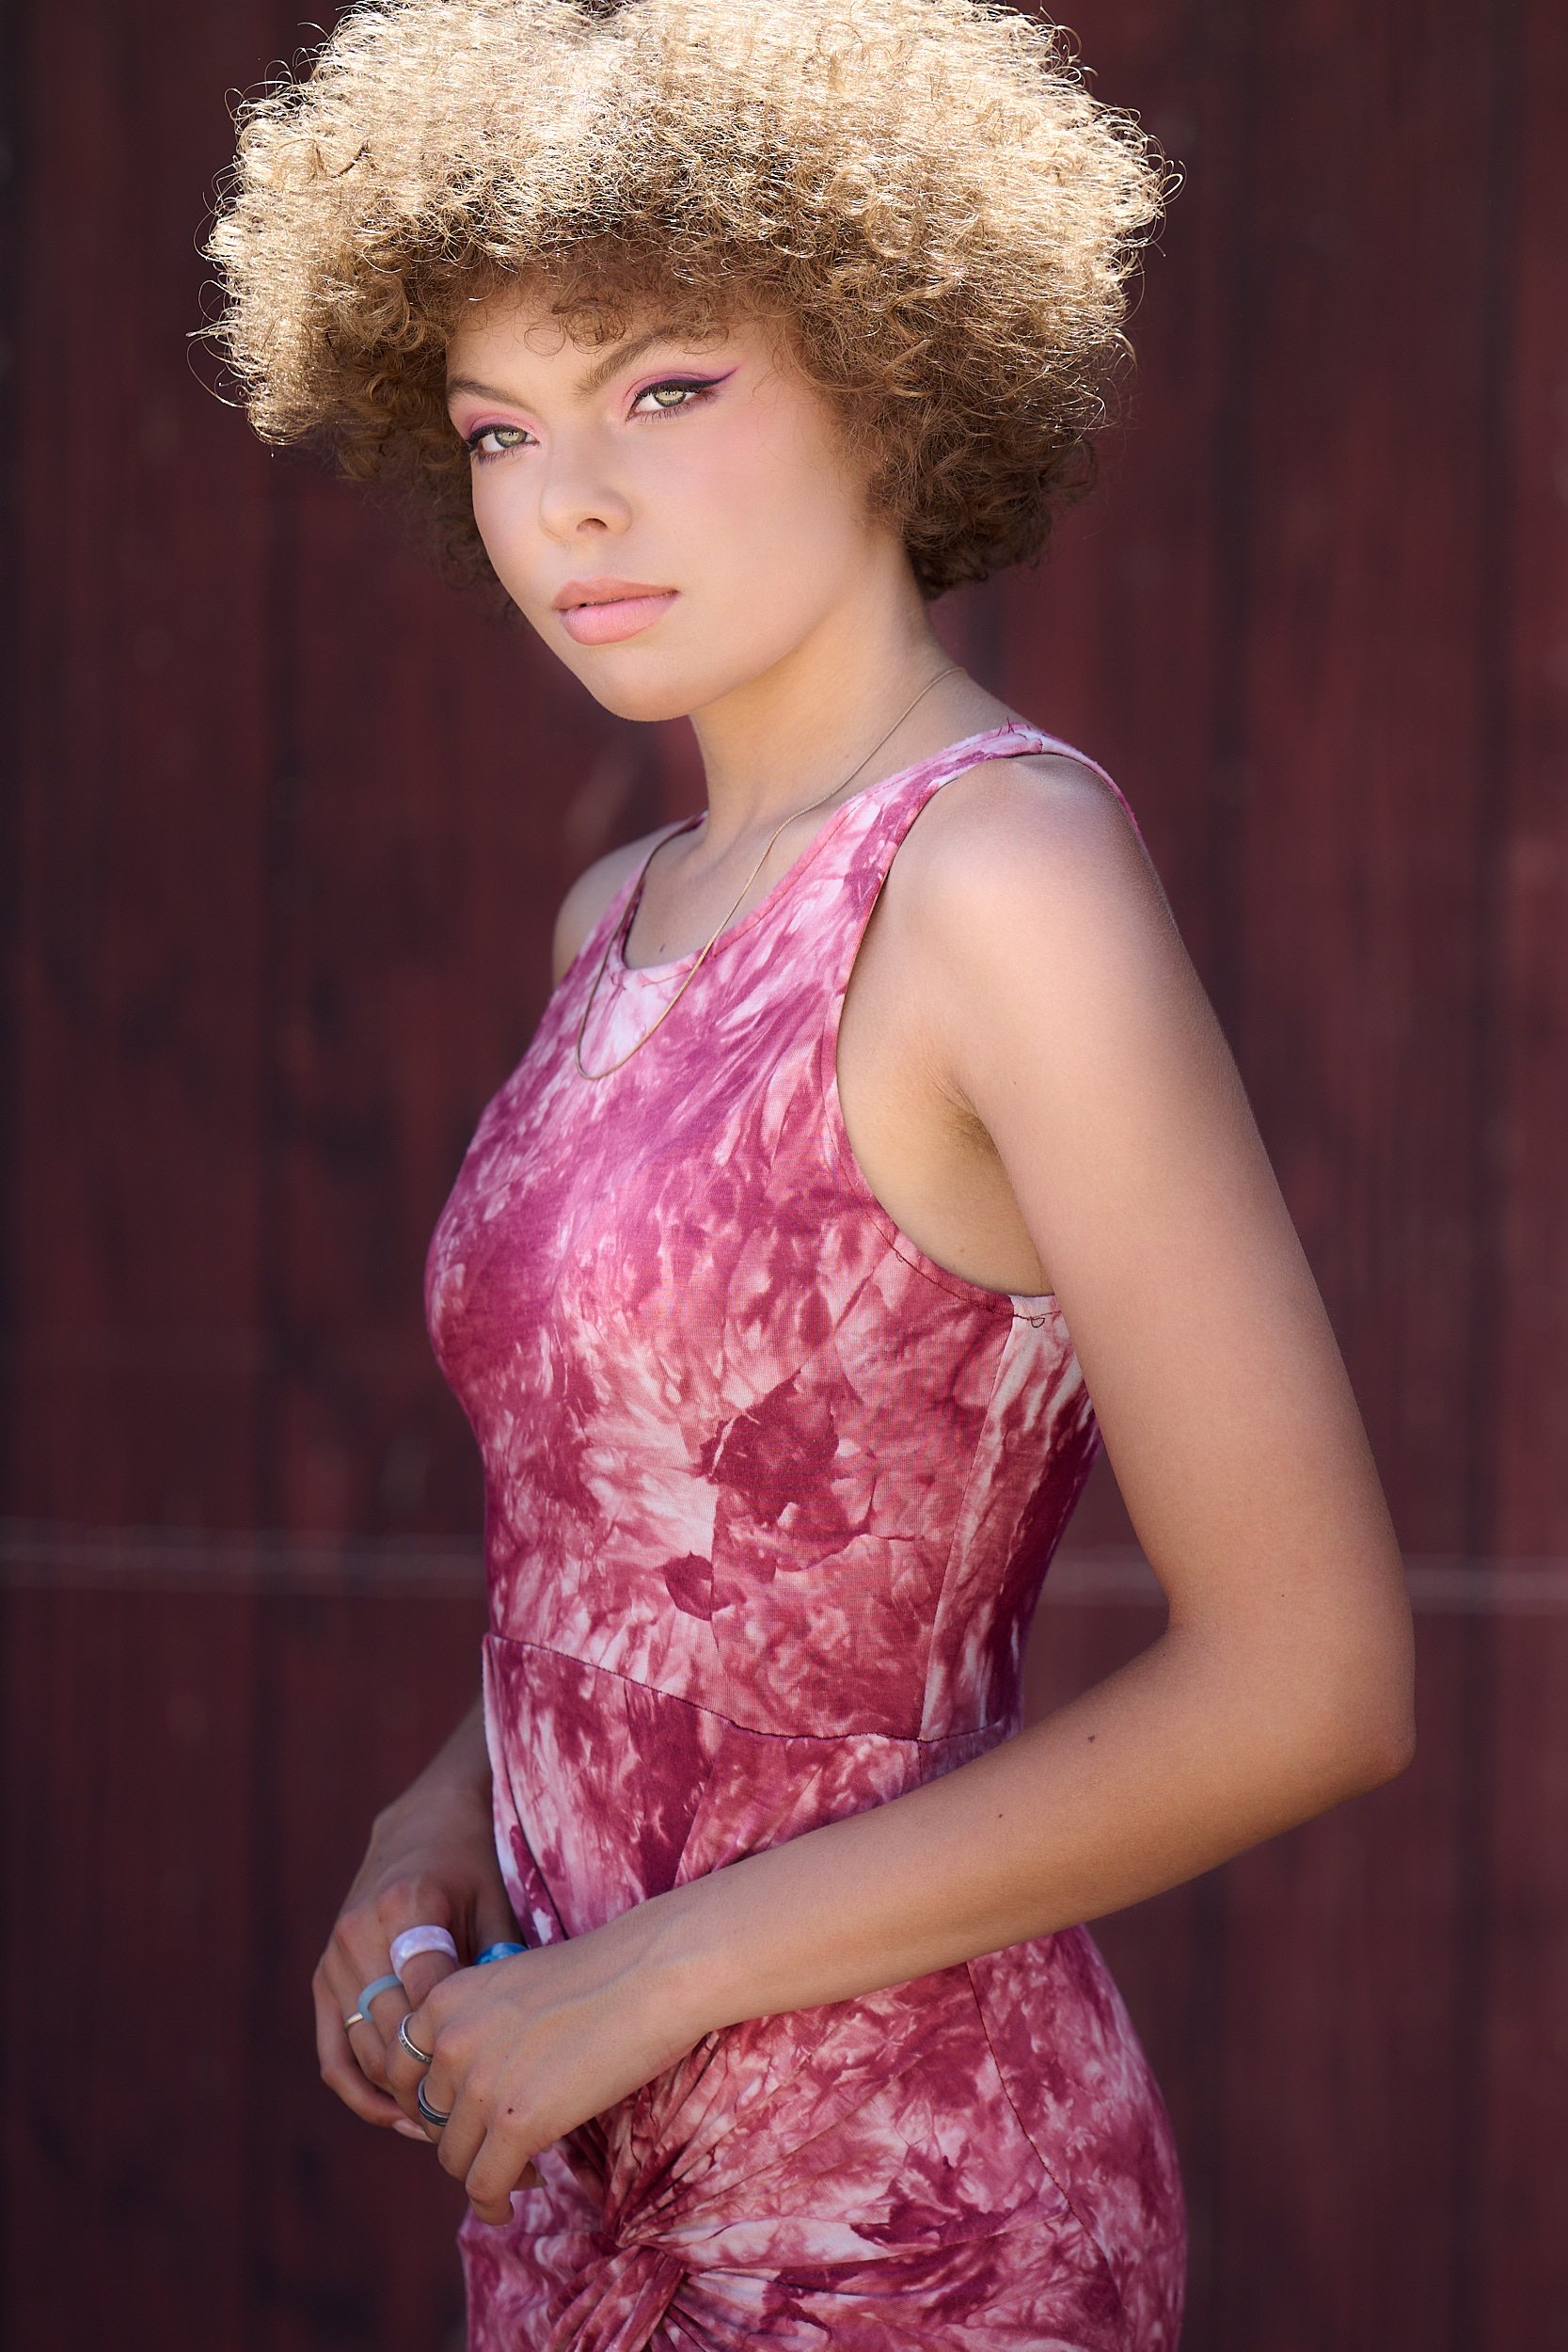  THE WOODLANDS, TEXAS - MAY 2022: Journee Reid is posing for formal and elegant portraits by a rustic wall. The young girl has short curly hair sunlit from above. She wears a pink sleeveless dress. 